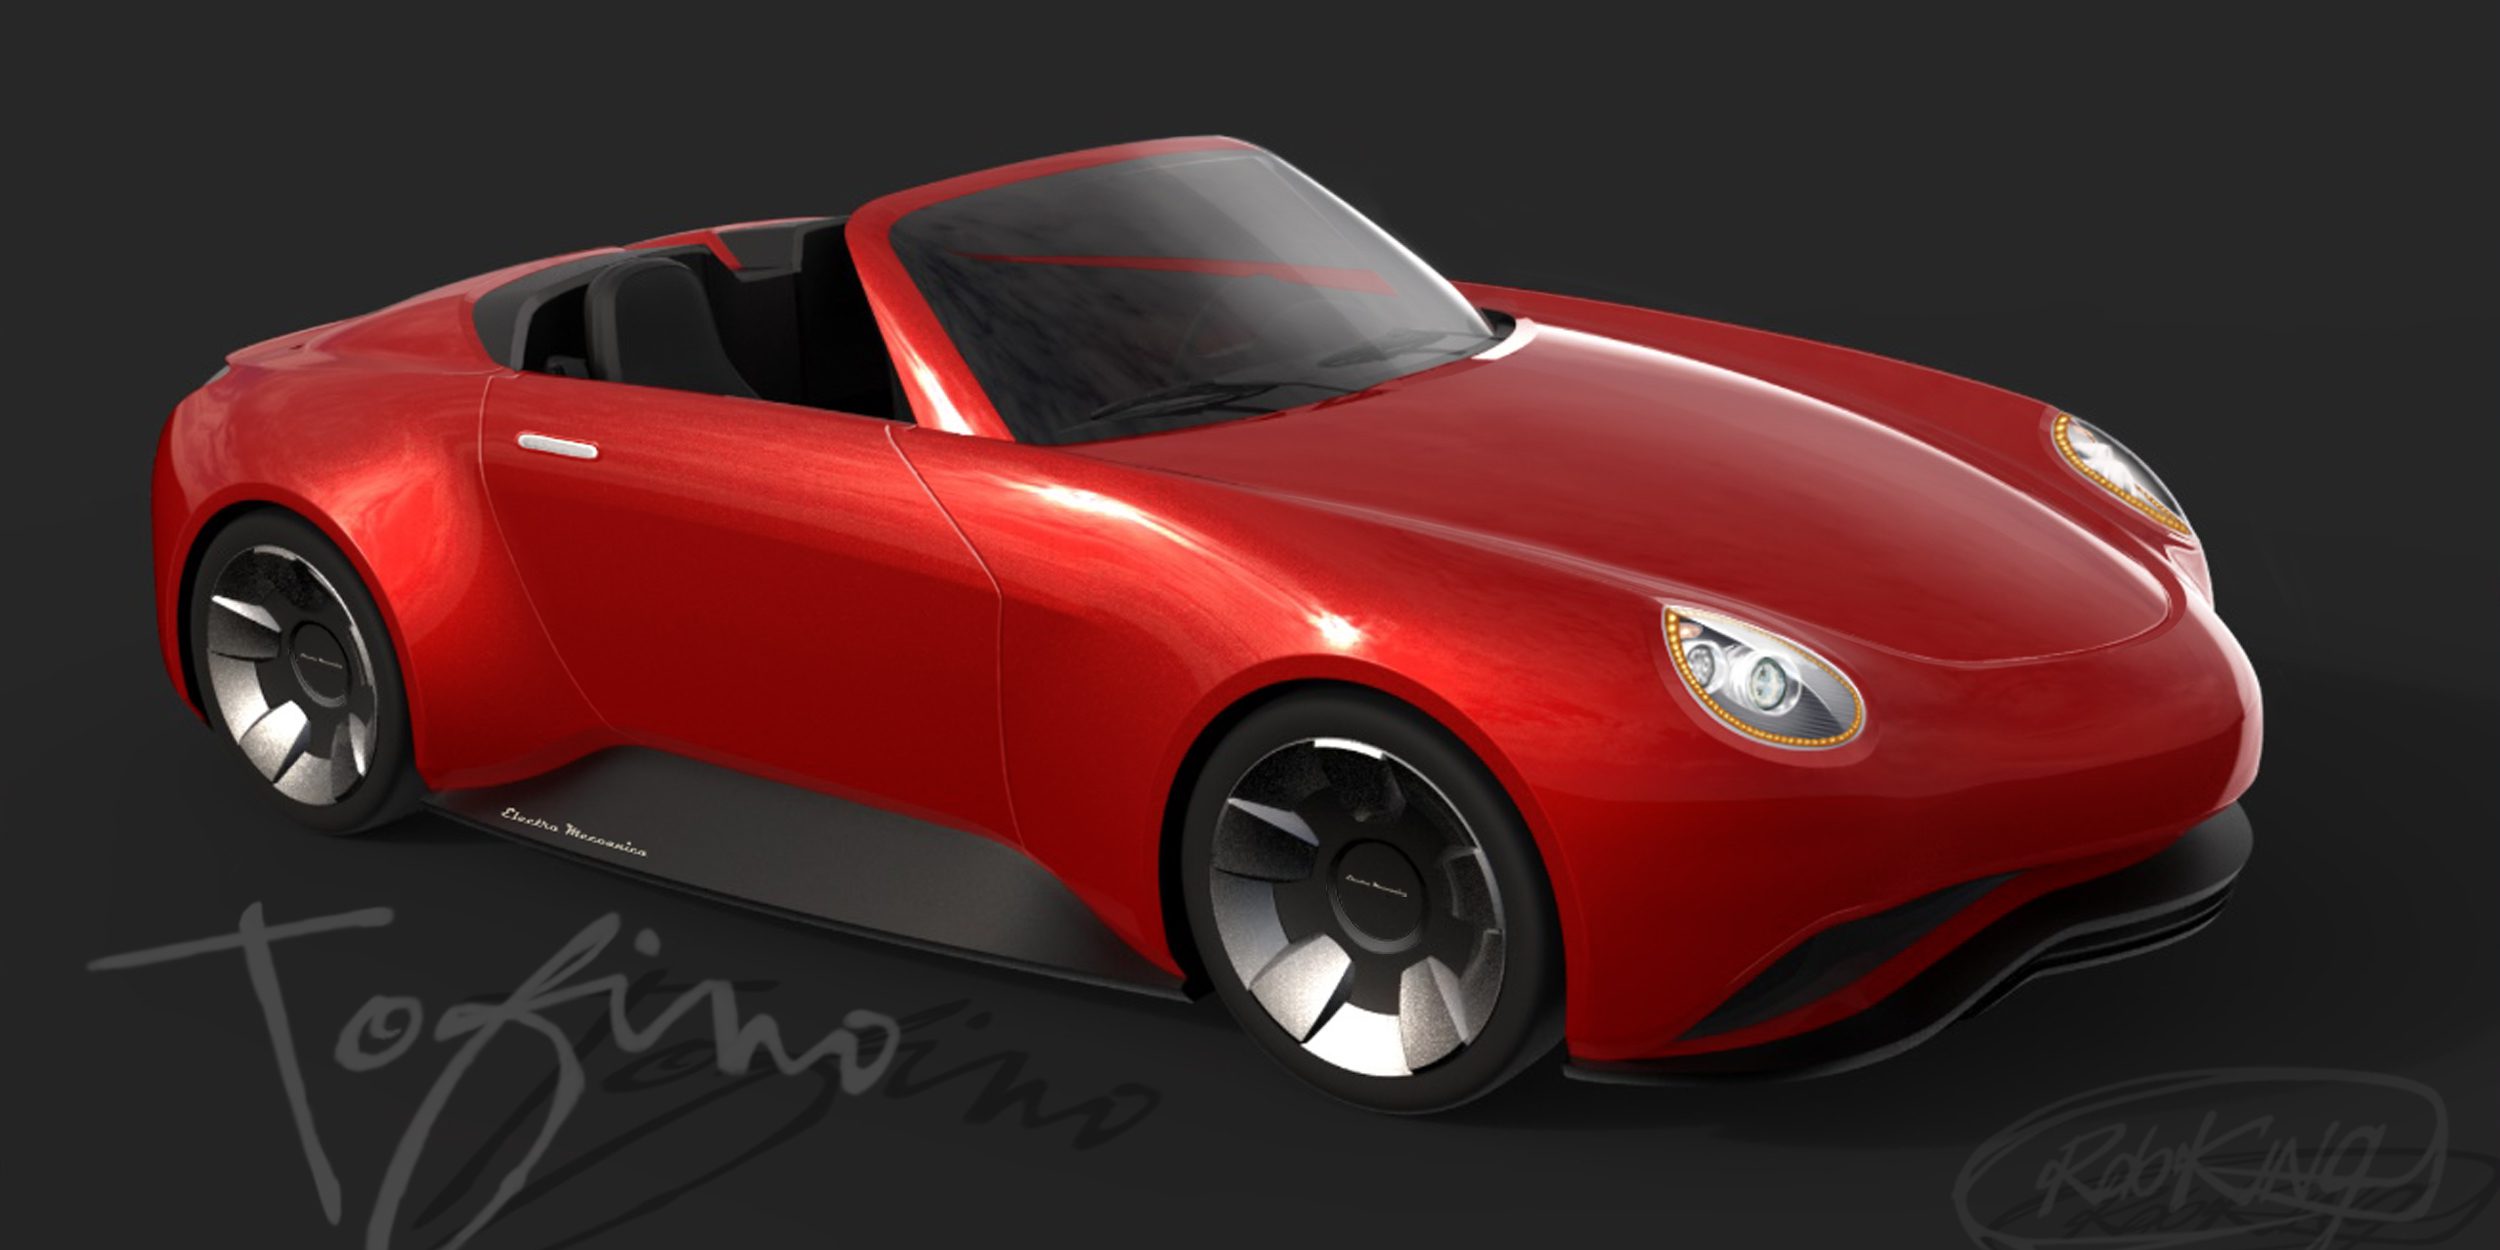 electra-meccanica-announces-new-all-electric-roadster-250-miles-range